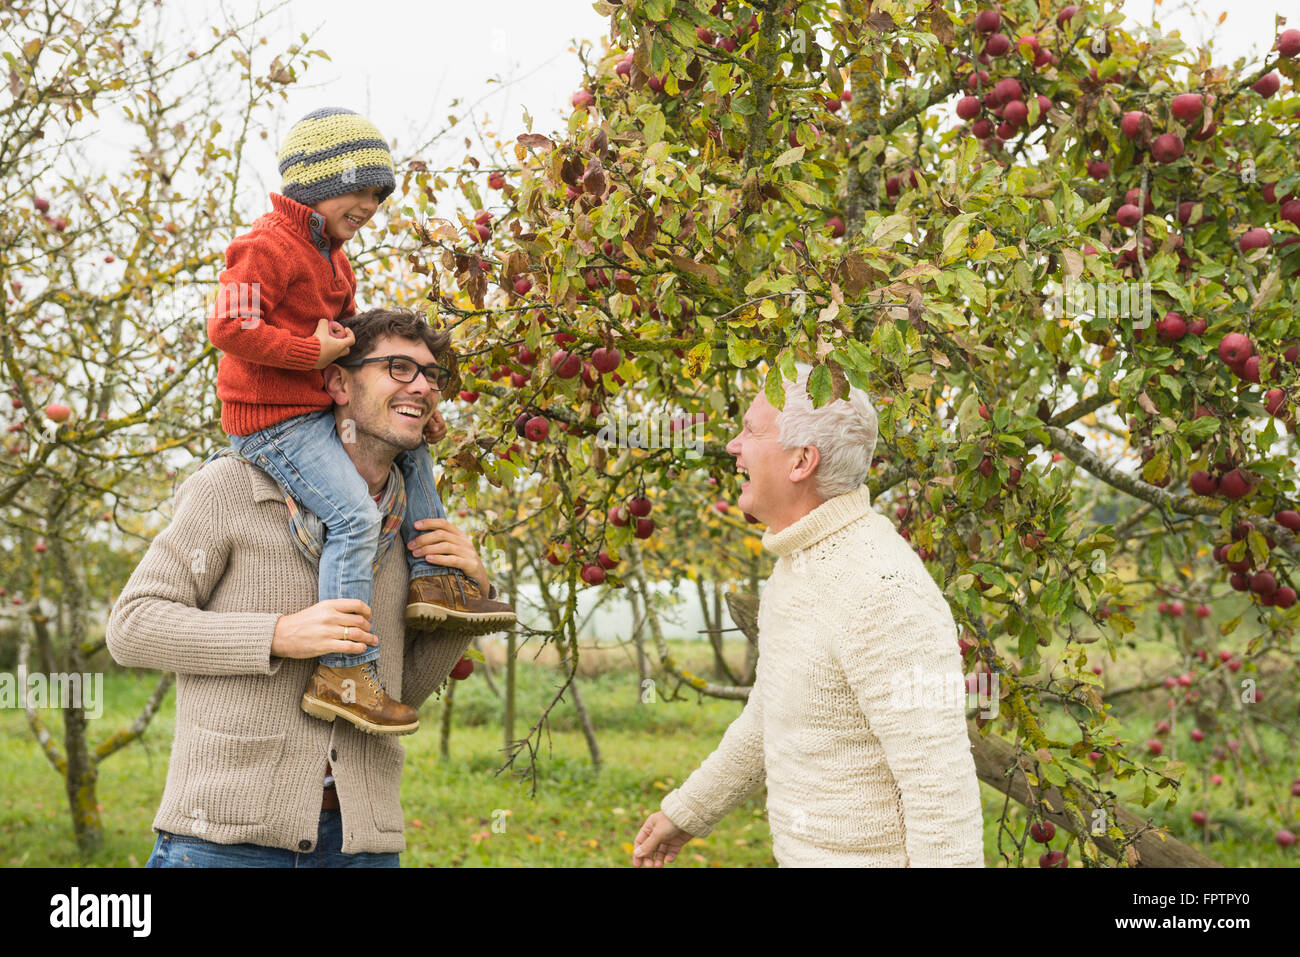 Father, son and grandfather picking apples from apple tree in an apple orchard, Bavaria, Germany Stock Photo